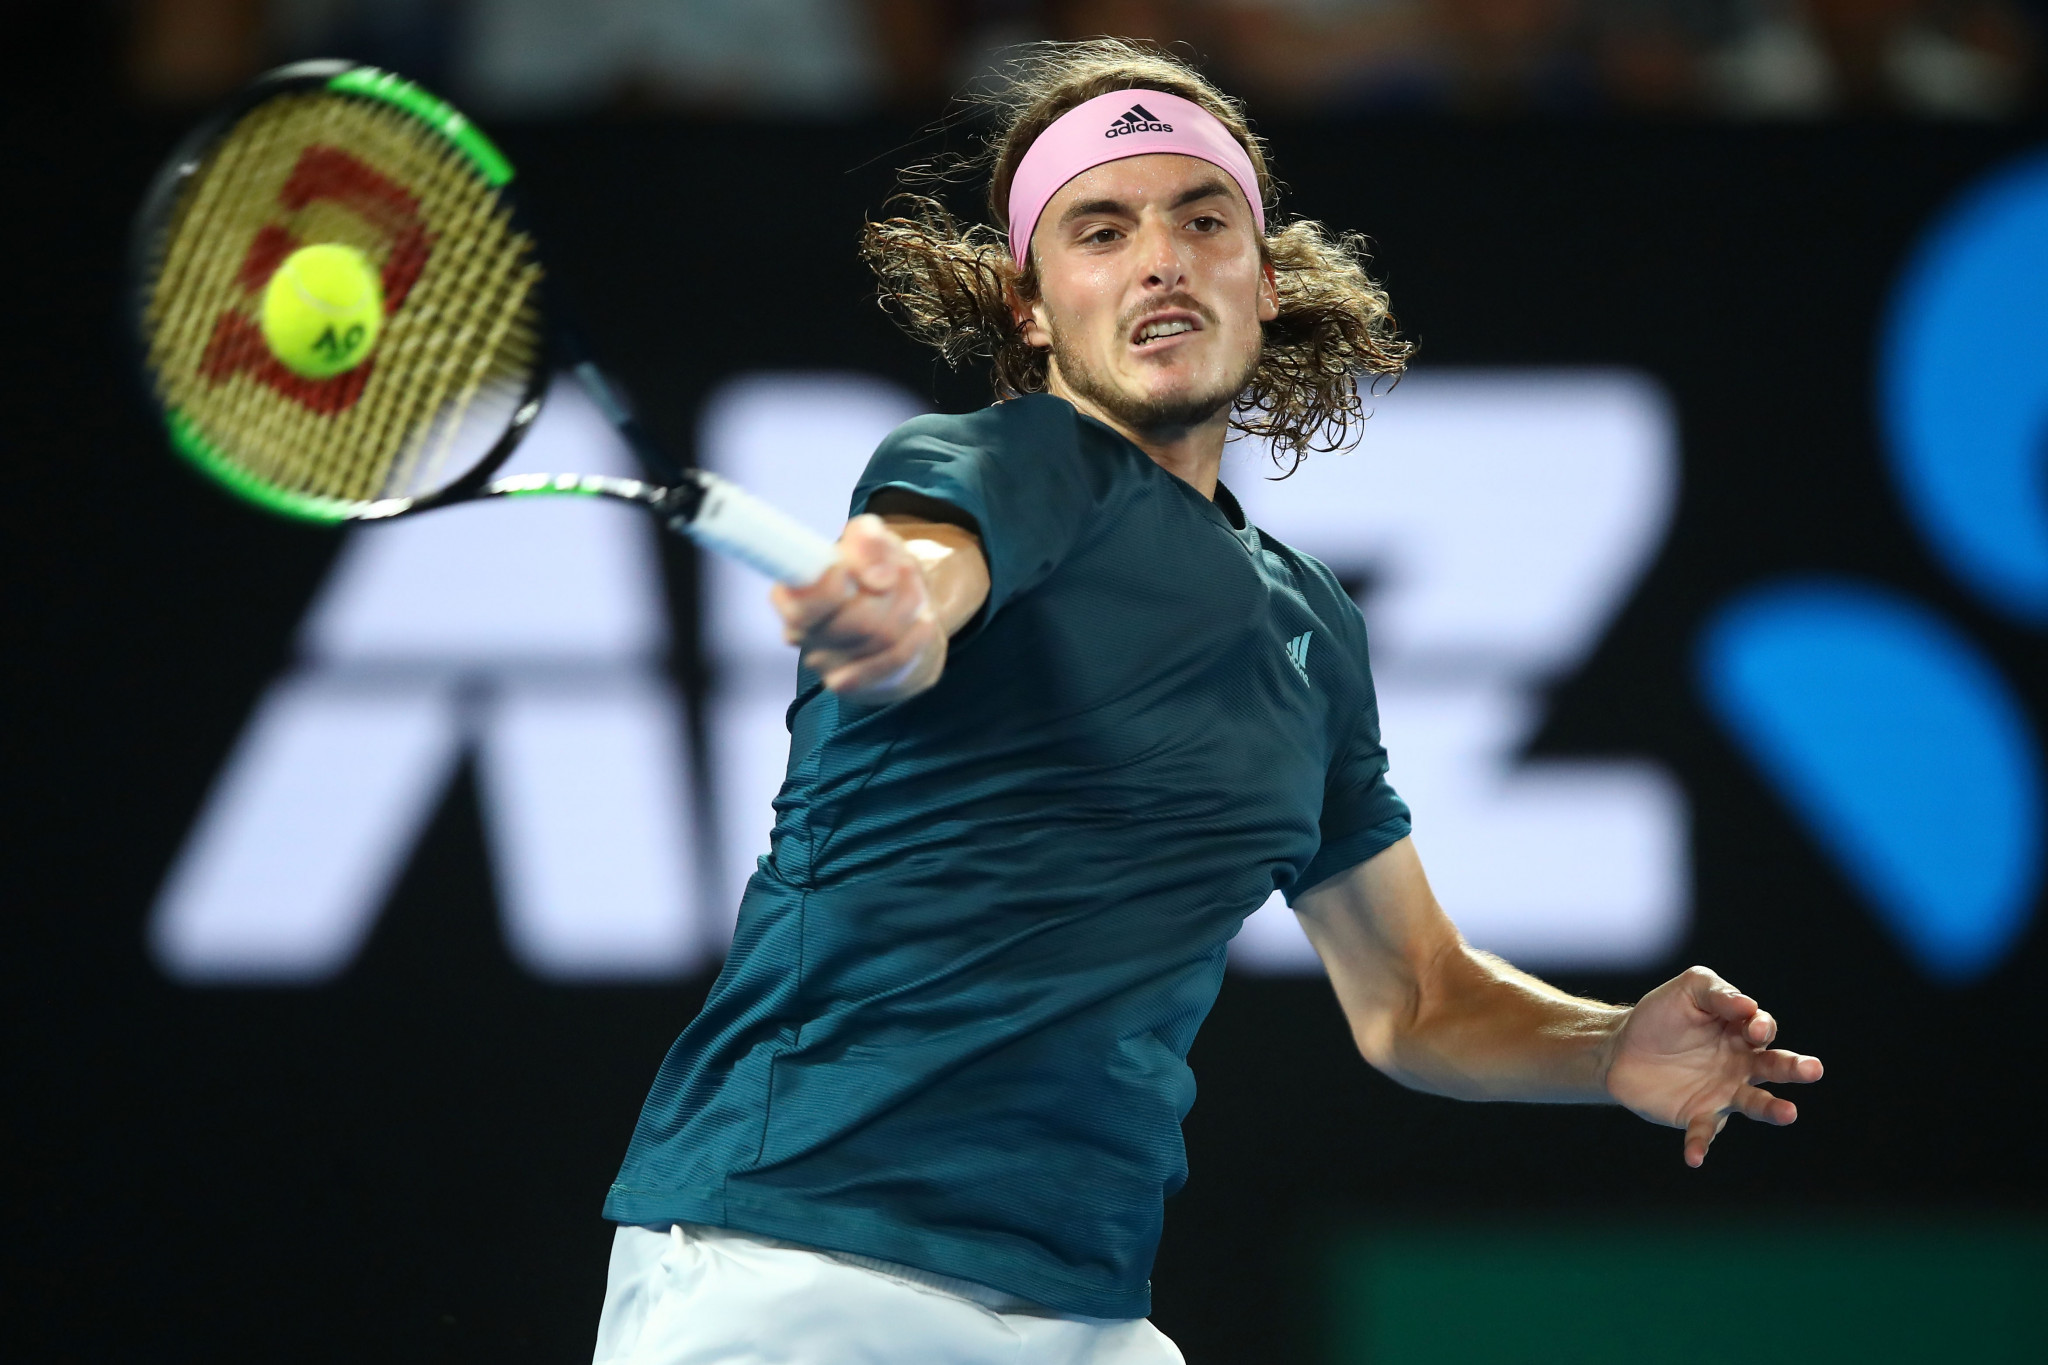 The match proved a step too far for Tsitsipas, but it is clear the 20-year-old has an extremely bright future ahead of him ©Getty Images